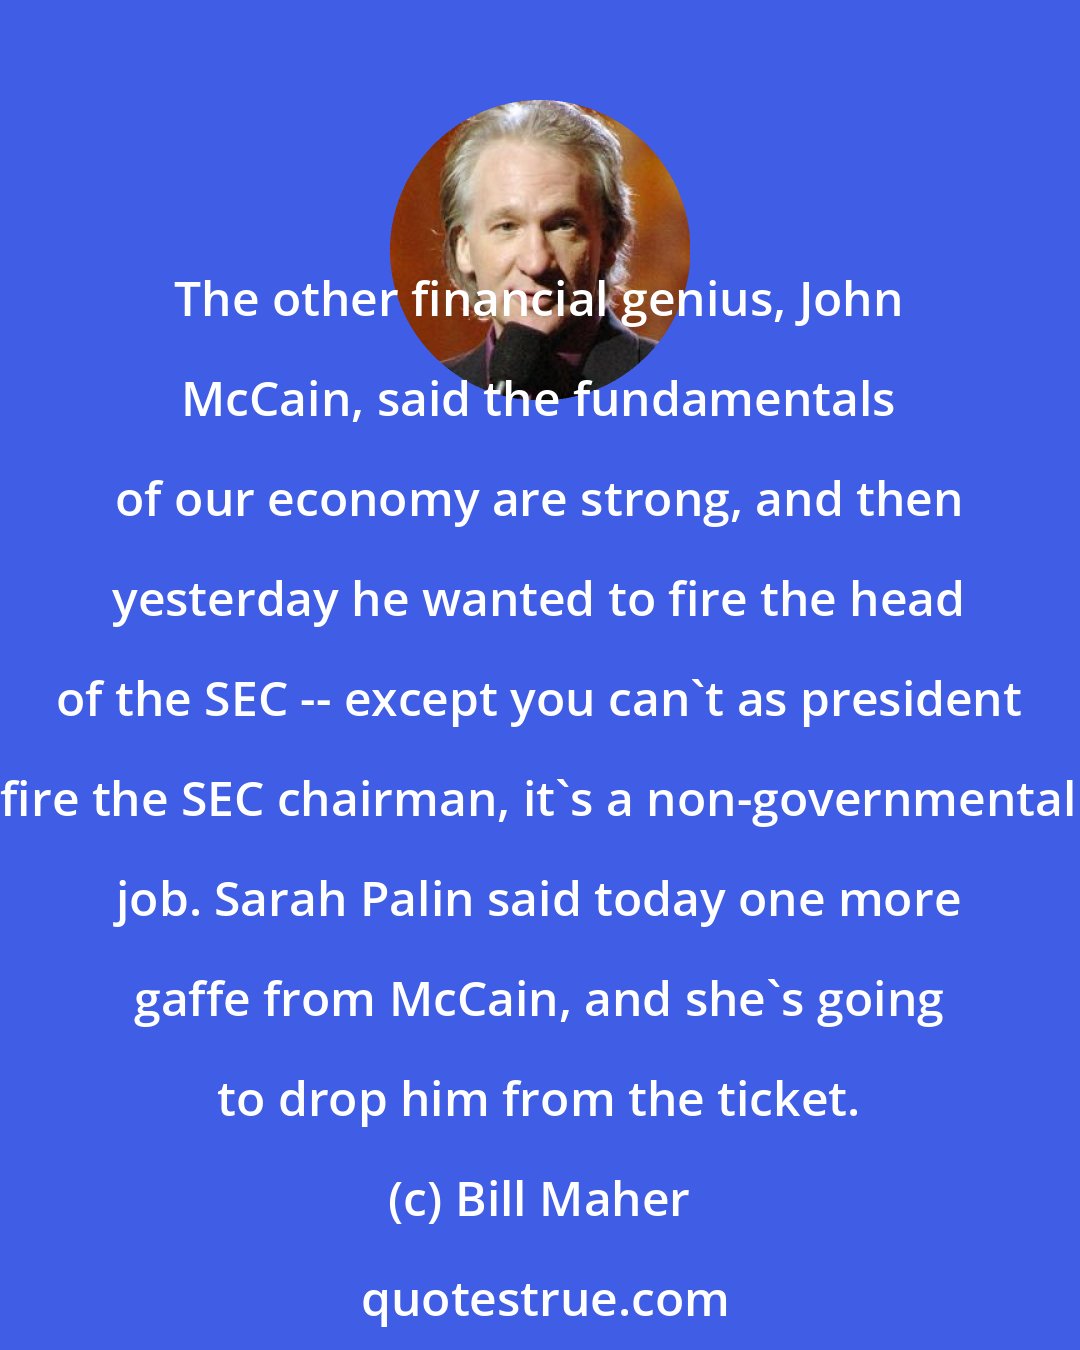 Bill Maher: The other financial genius, John McCain, said the fundamentals of our economy are strong, and then yesterday he wanted to fire the head of the SEC -- except you can't as president fire the SEC chairman, it's a non-governmental job. Sarah Palin said today one more gaffe from McCain, and she's going to drop him from the ticket.